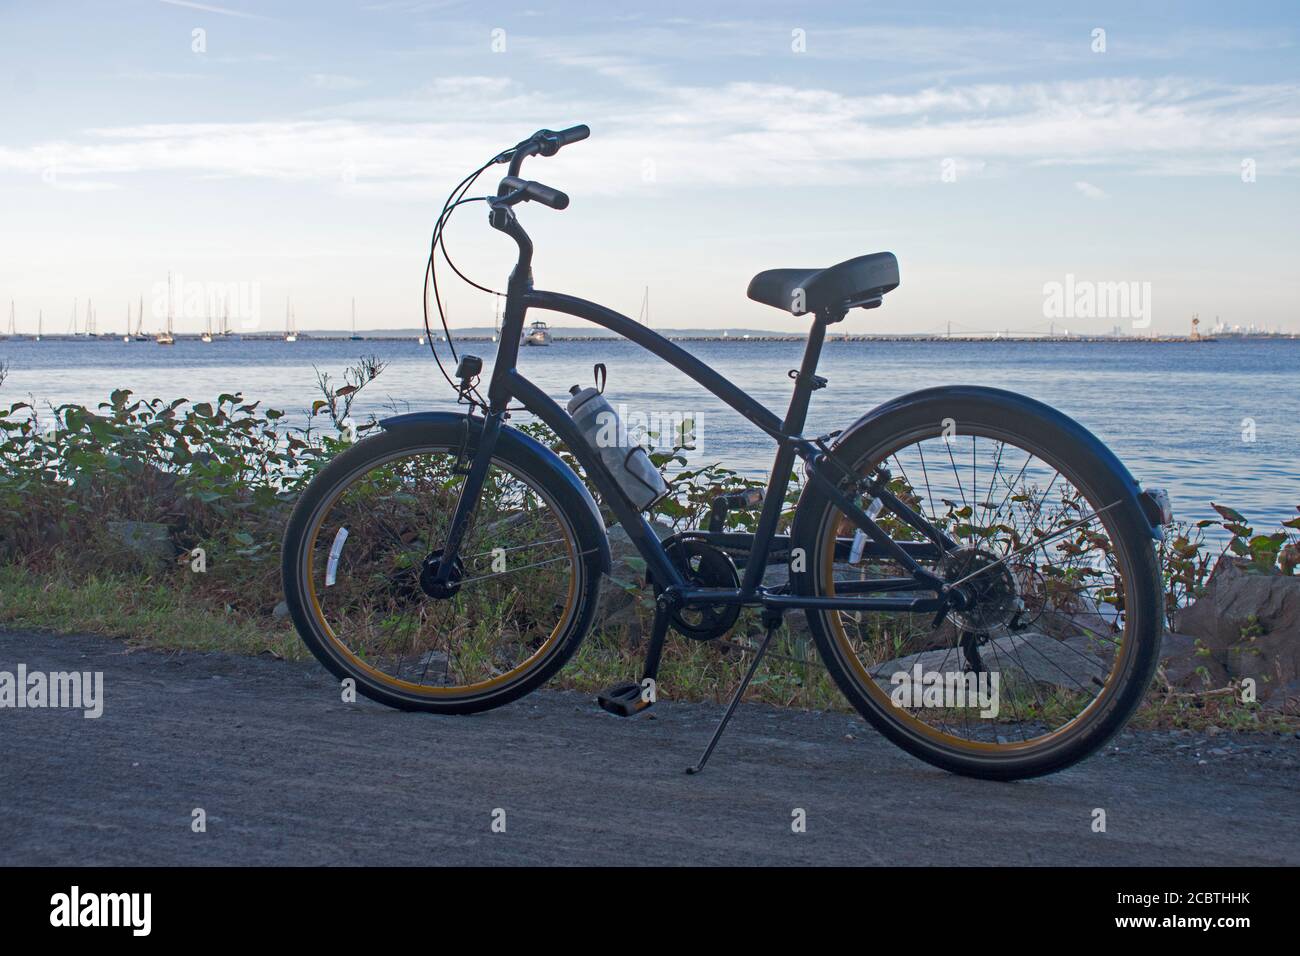 Man's bicycle standing on the kickstand on a sandy track next to the water at the Henry Hudson Trail, Popamora Point, Highlands, New Jersey, USA. Stock Photo